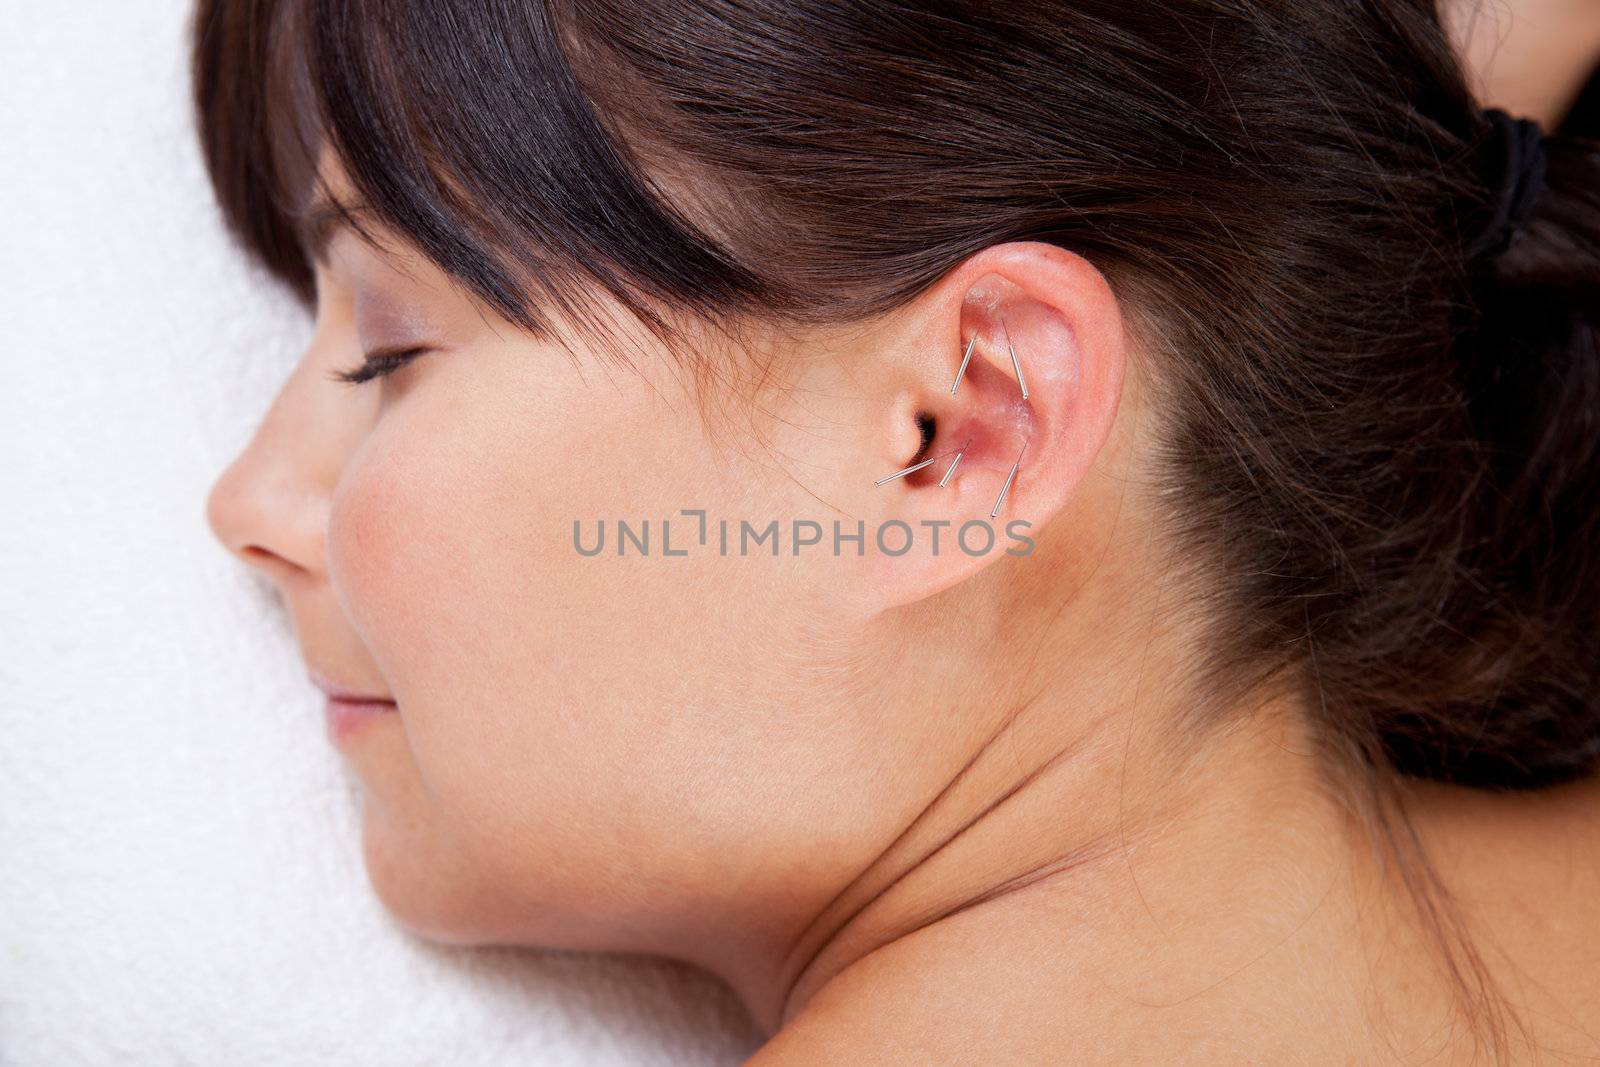 Attractive female relaxing while receiving an acupuncture treatment on the ear